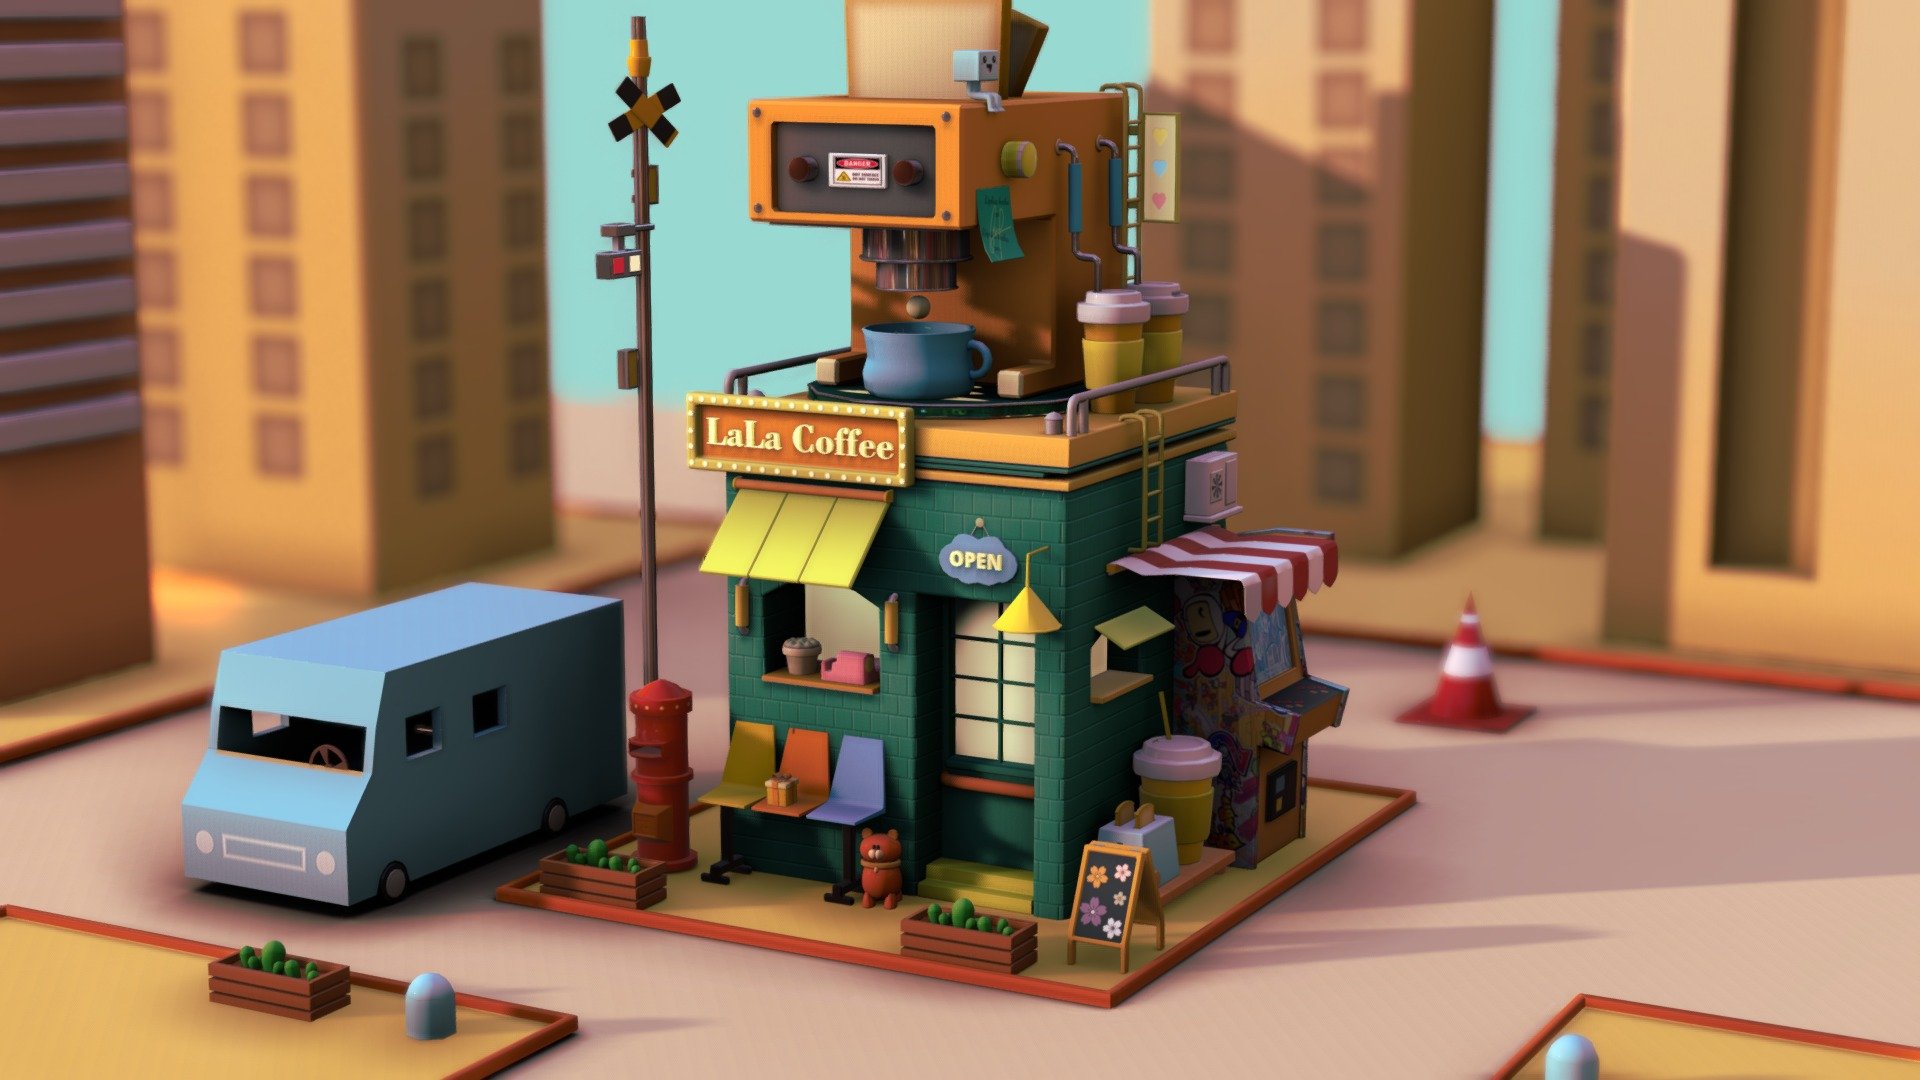 A diorama of a Toy café. A project that I made in Maya, and textured in Substance Painter, to test my skills. The original idea came from https://www.pinterest.jp/pin/1091137815956458468/. Don´t know if that user is the original author tho. Hope you like it - LaLa Café - 3D model by Franchute (@FrancoGam) 3d model